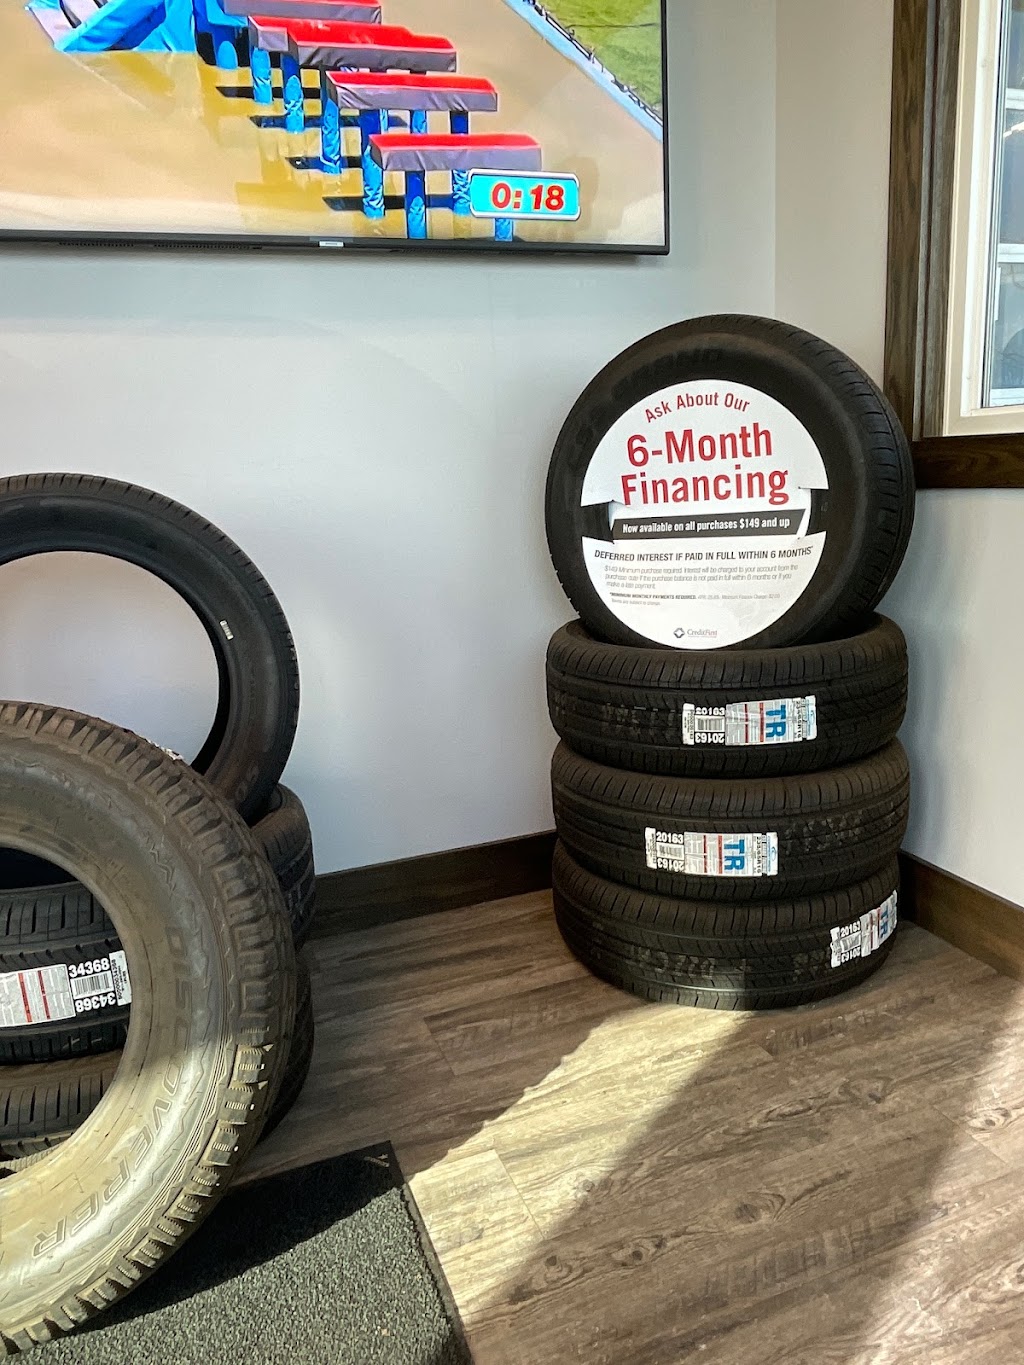 State Street Tire | 3276 Manchester Rd, Akron, OH 44319, USA | Phone: (330) 645-7000